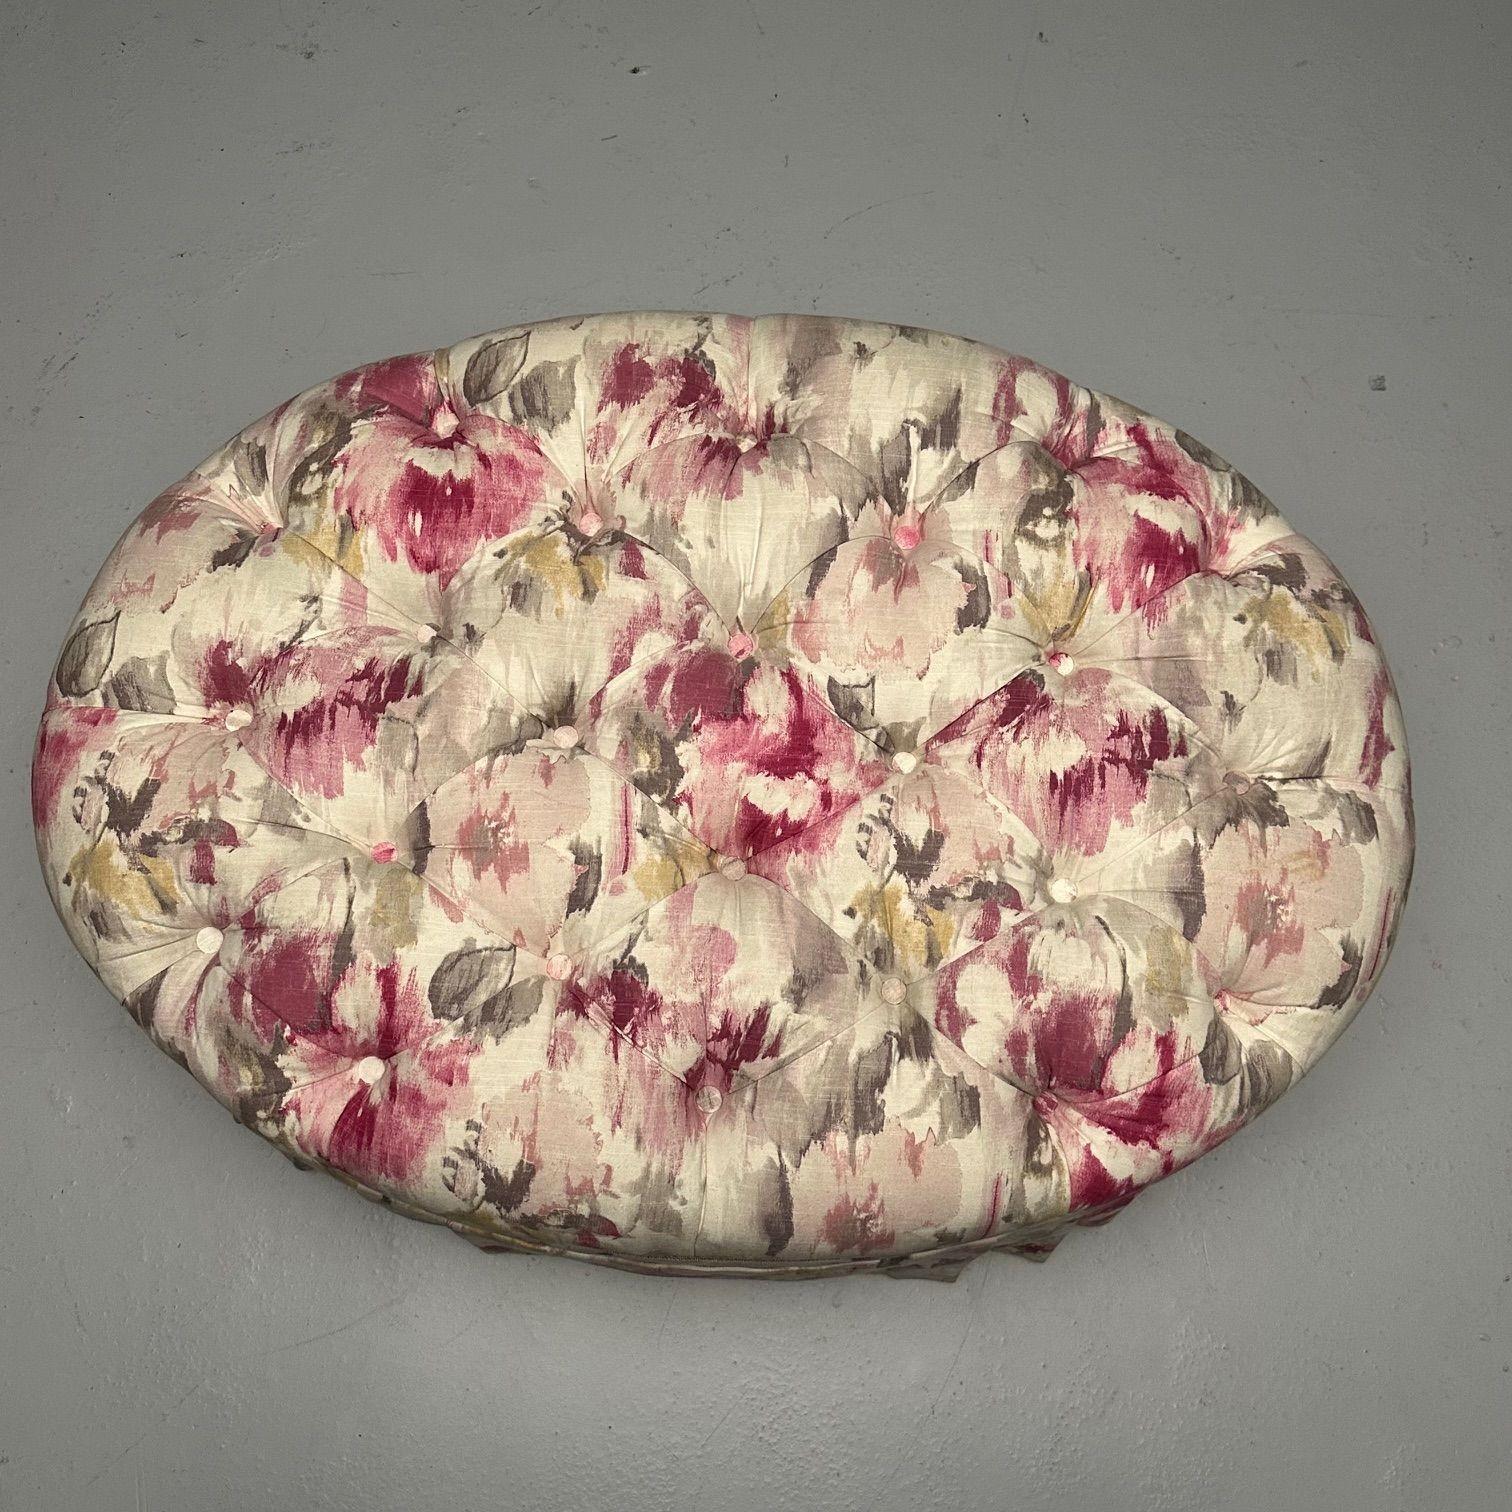 Contemporary Traditional, Oval Tufted Ottoman or Pouf, Tie Dye Floral Fabric, Wood, USA 2010s For Sale